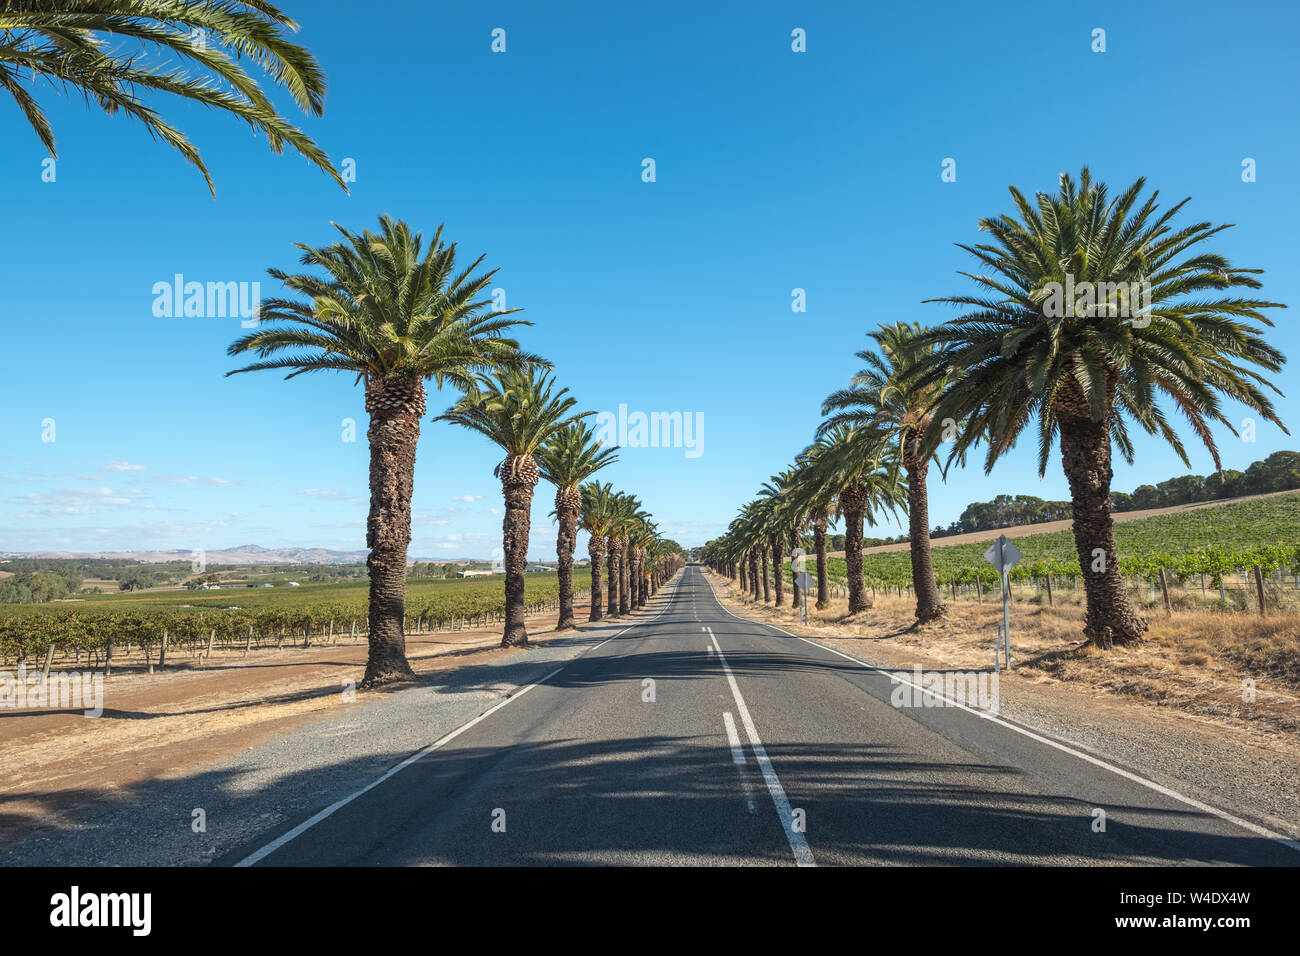 Looking along palm-tree lined Seppeltsfield Road through the vineyards of the Barossa Valley wine region in South Australia Stock Photo